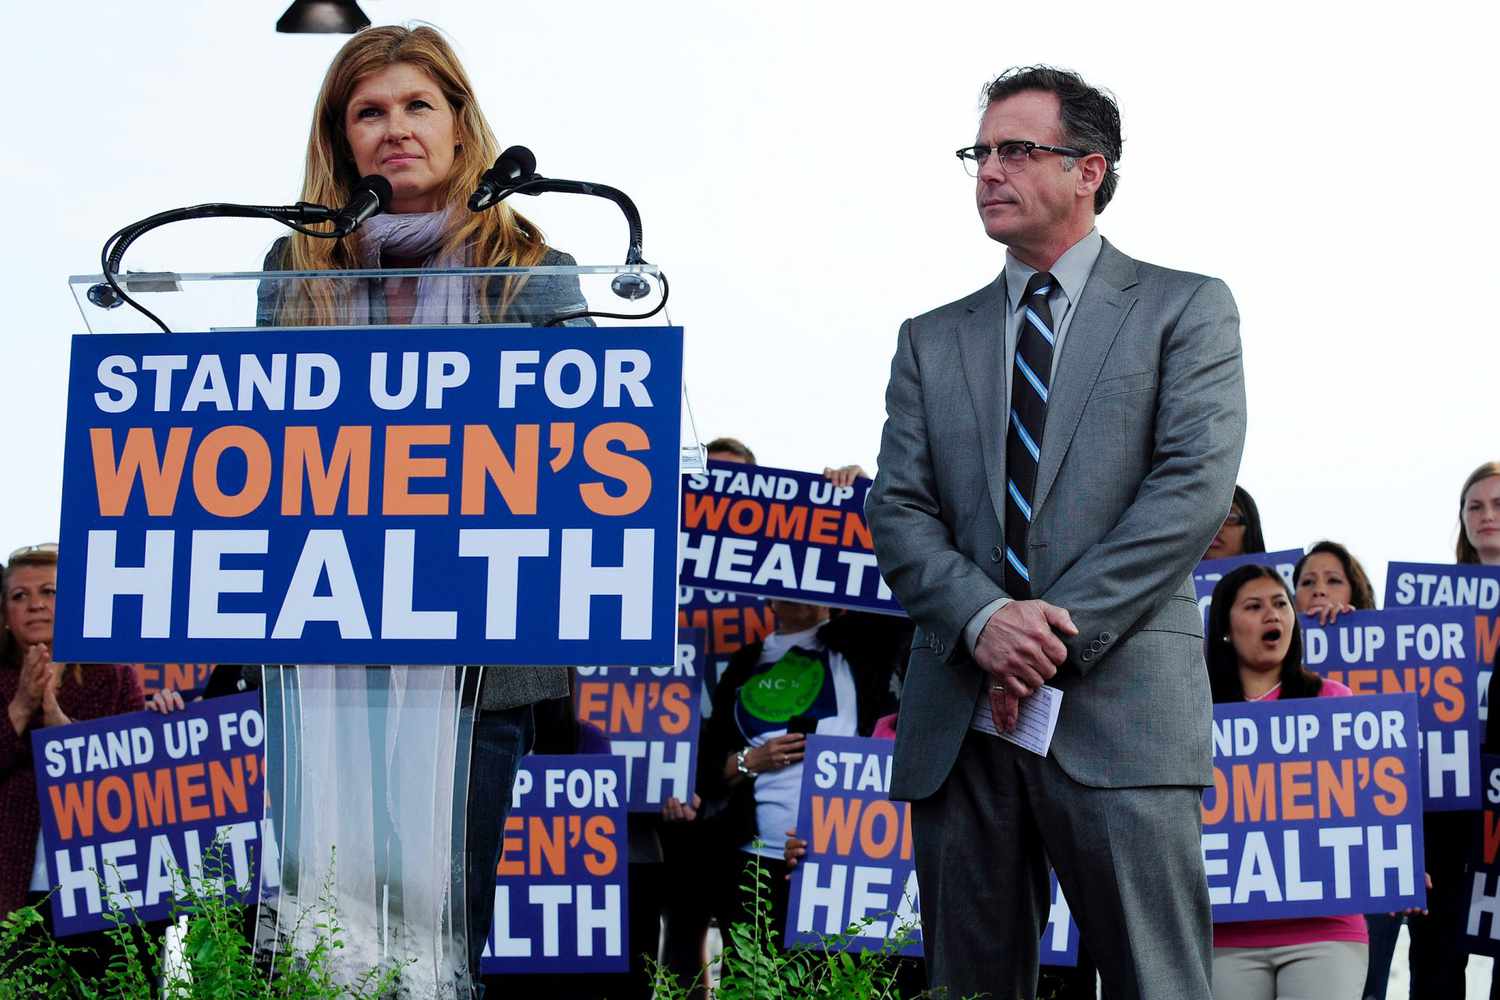 Connie Britton and David Eigenberg at the Stand Up for Women's Health Rally in Washington, D.C. on April 7, 2011